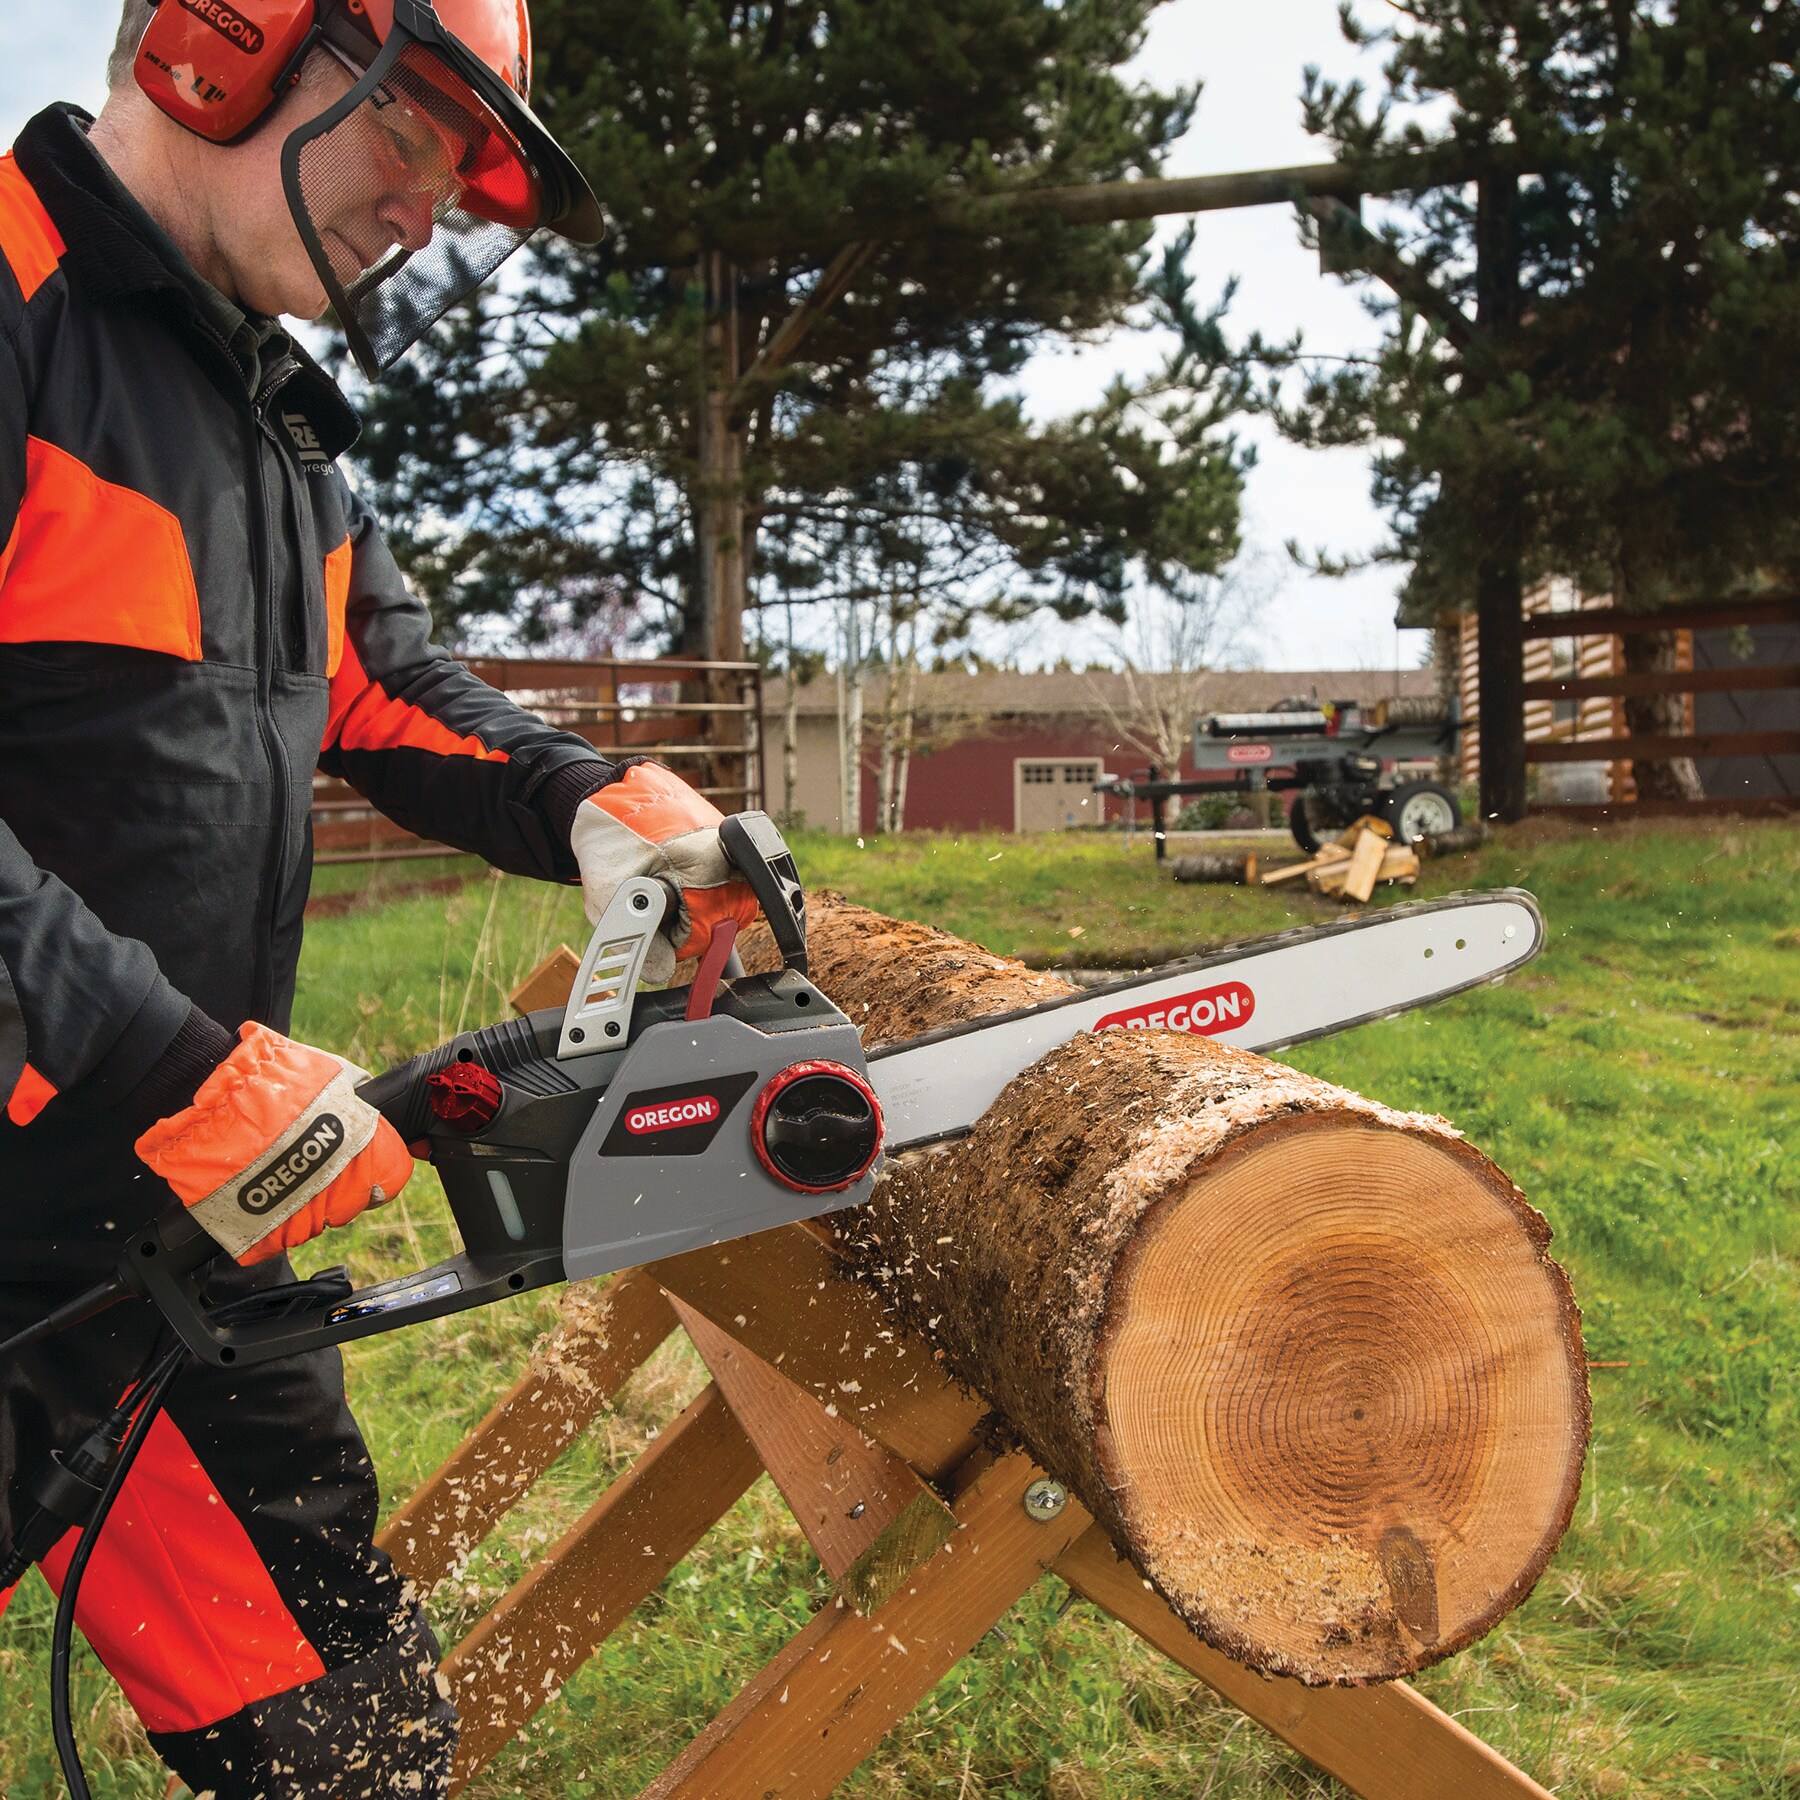 Oregon CS1400 15 Amps 16-in Corded Electric Chainsaw